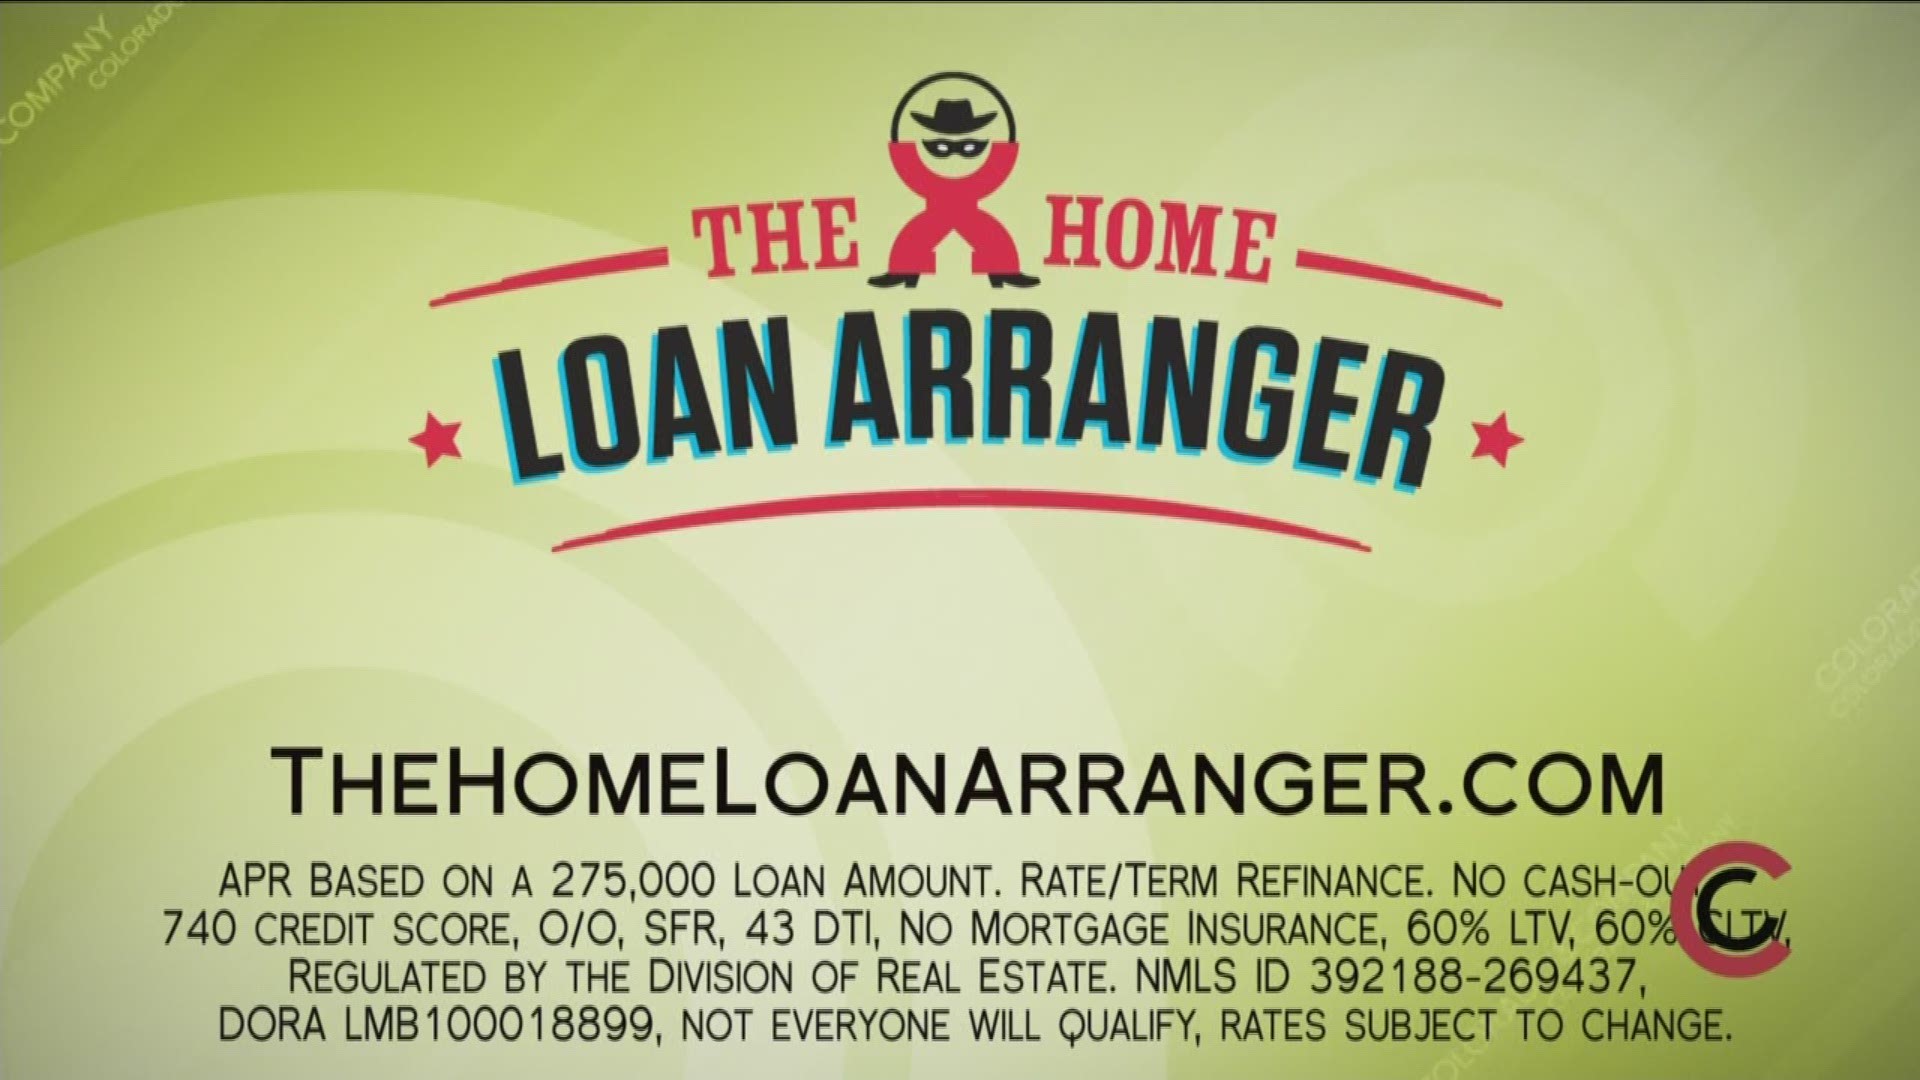 Call the Home Loan Arranger at 303.862.4742 to get started on a new home loan. Your payment won't be due until April! Learn more at TheHomeLoanArranger.com.